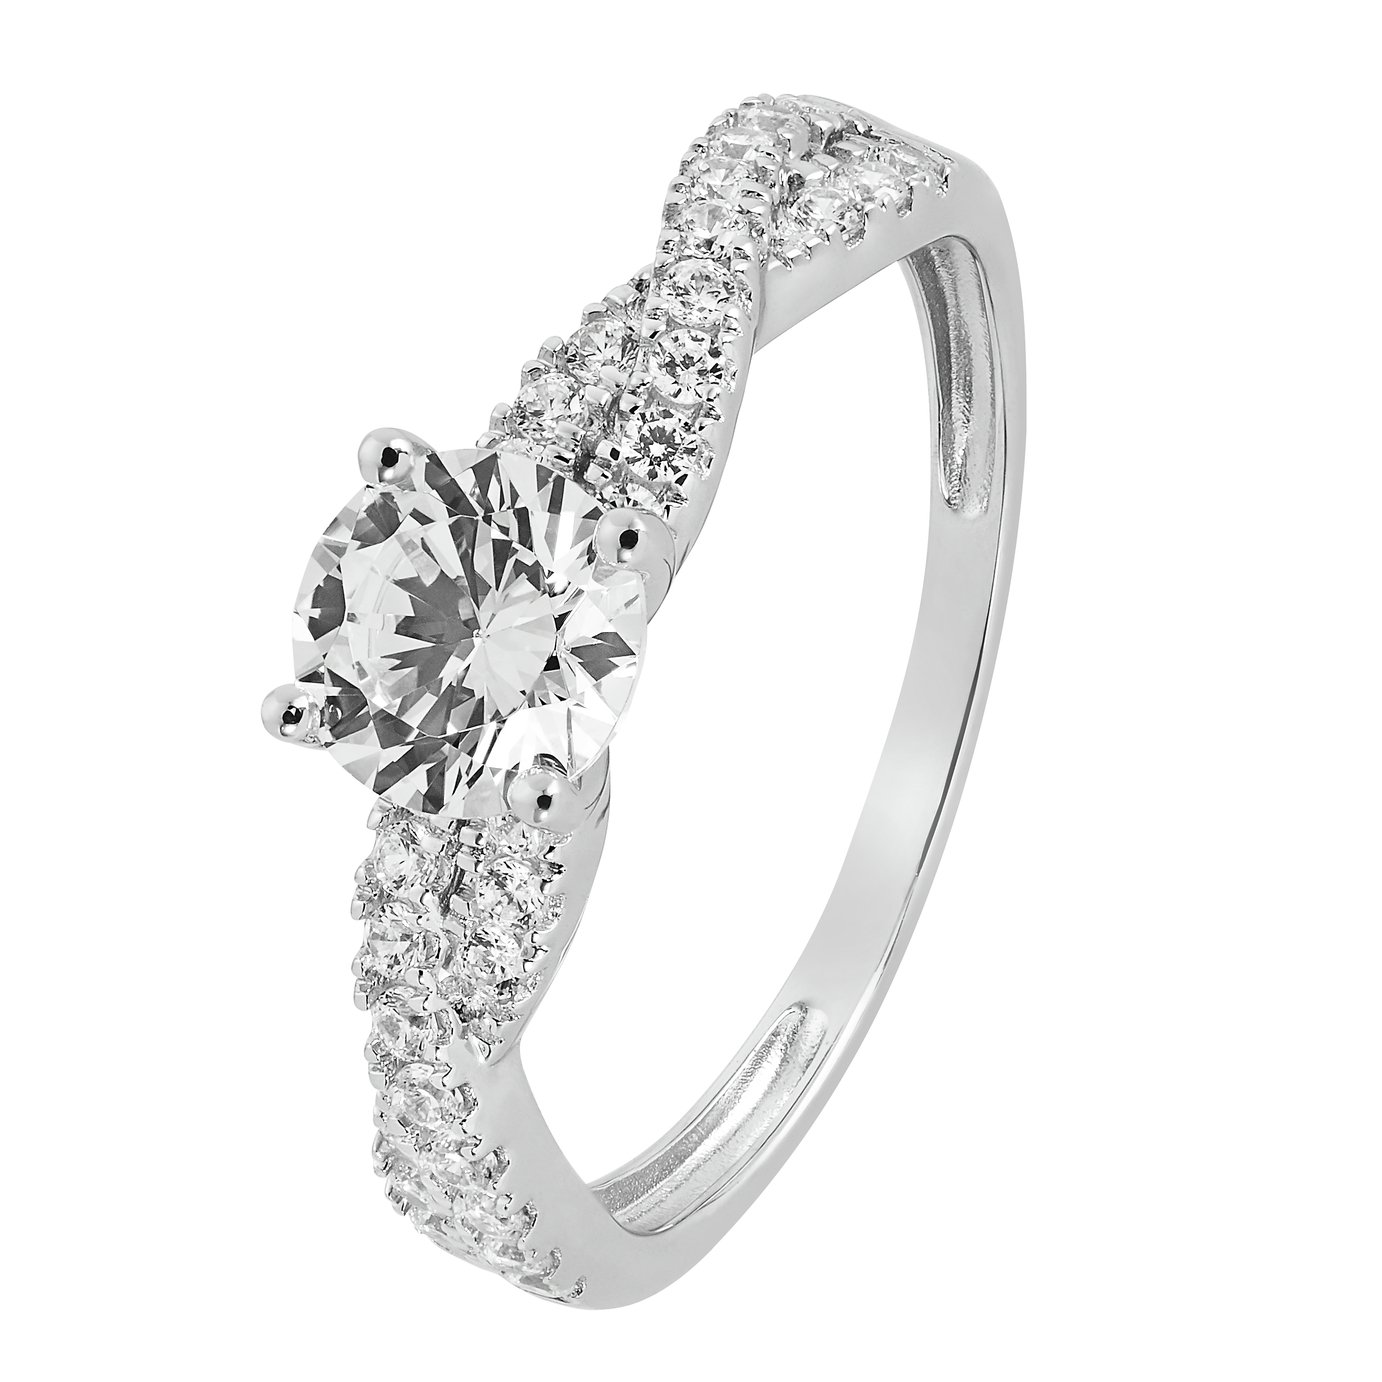 Revere 9ct White Gold Cubic Zirconia Engagement Ring - M